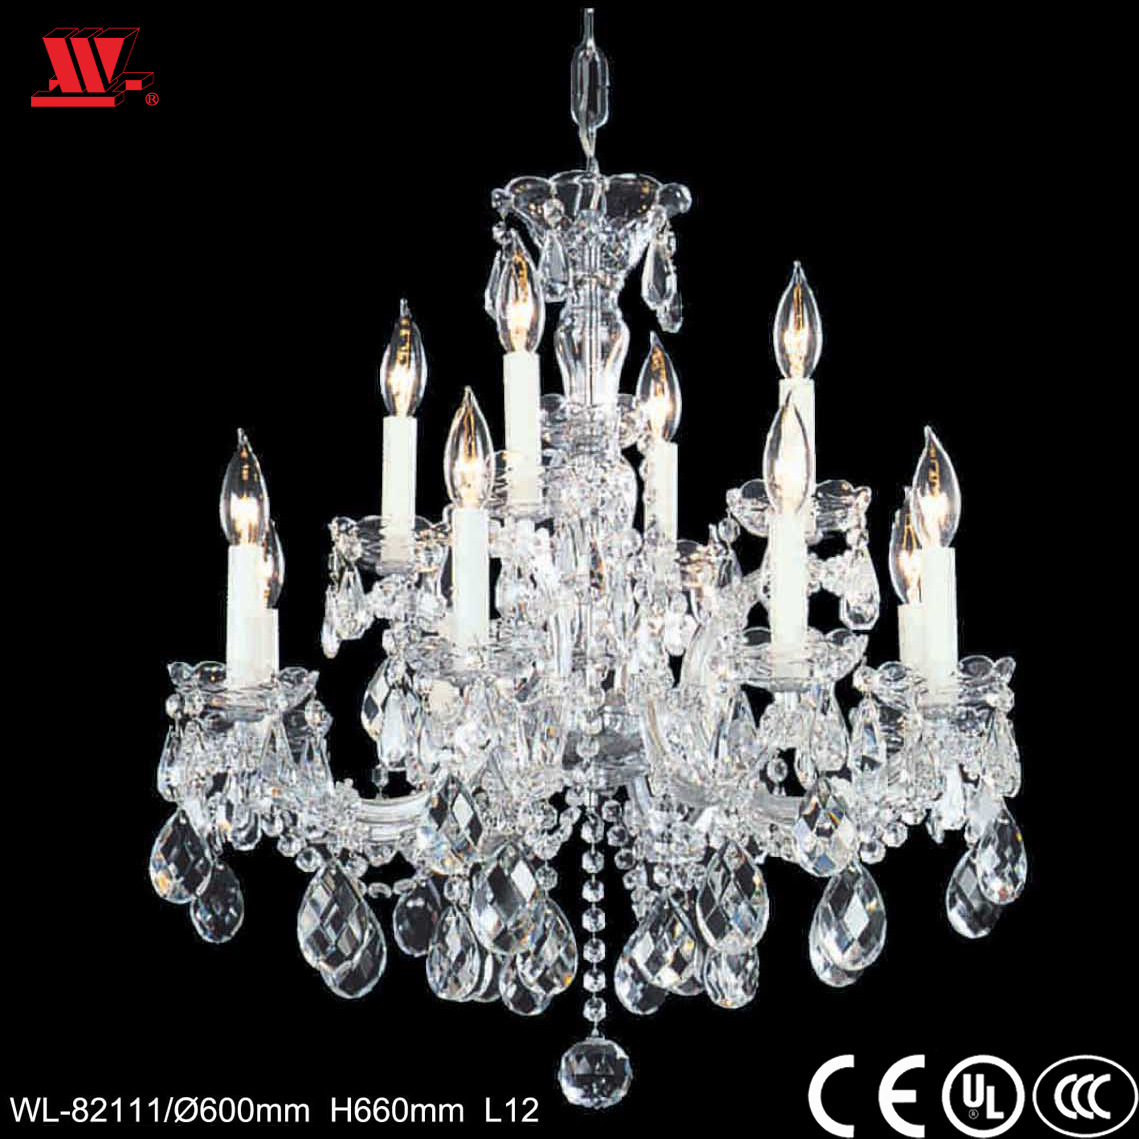 Crystal Chandelier with Glass Chains Wl-82111